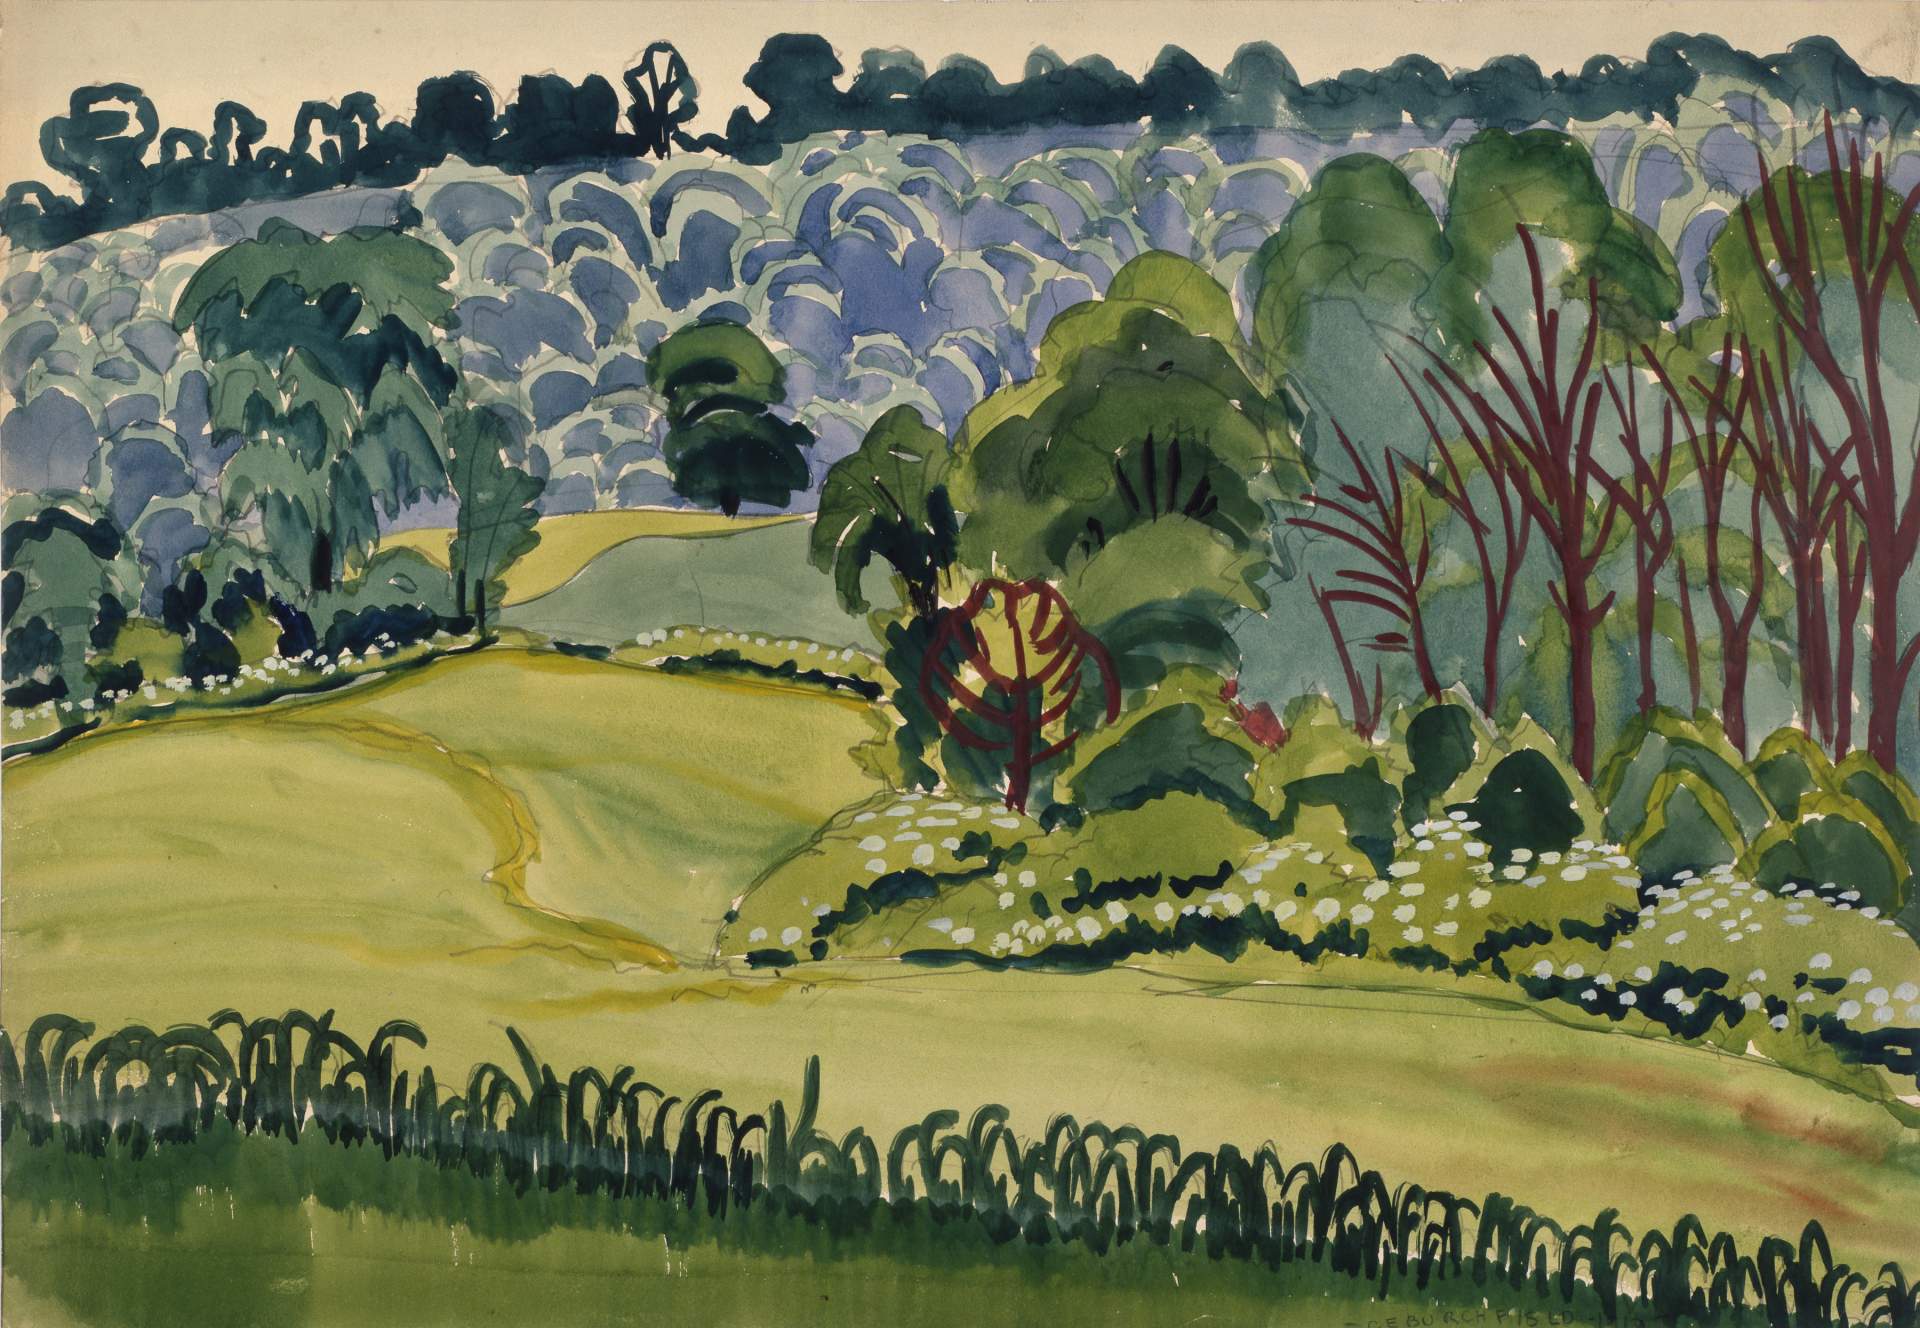 Charles E. Burchfield, Letter to Mr. and Mrs. Edward Root, March 13, 1933